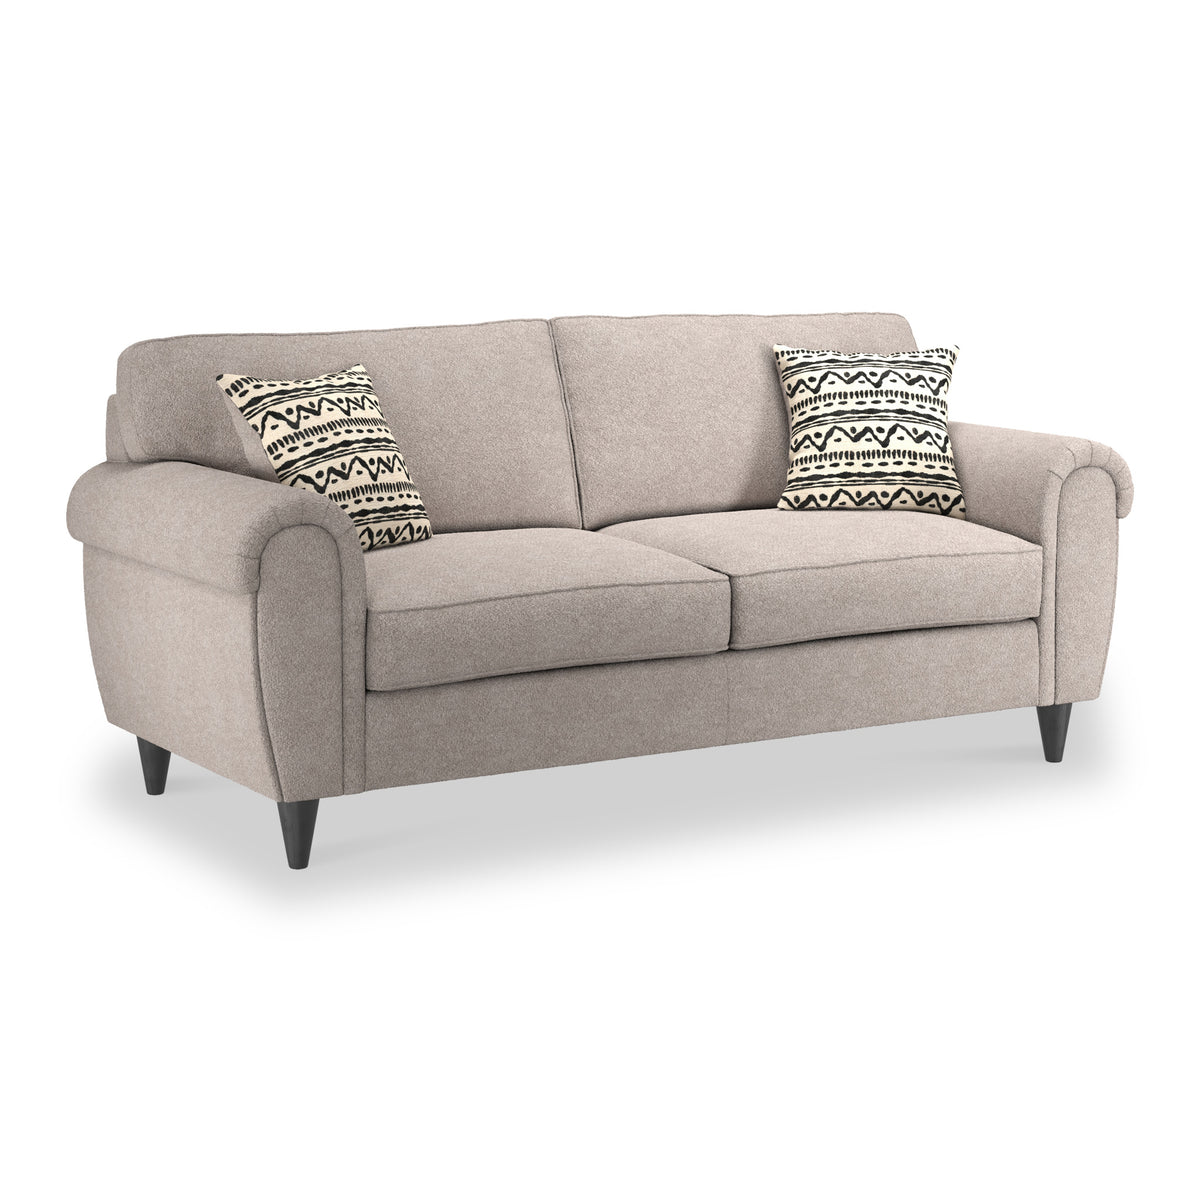 Jessie Mink 3 Seater Sofa from Roseland Furniture